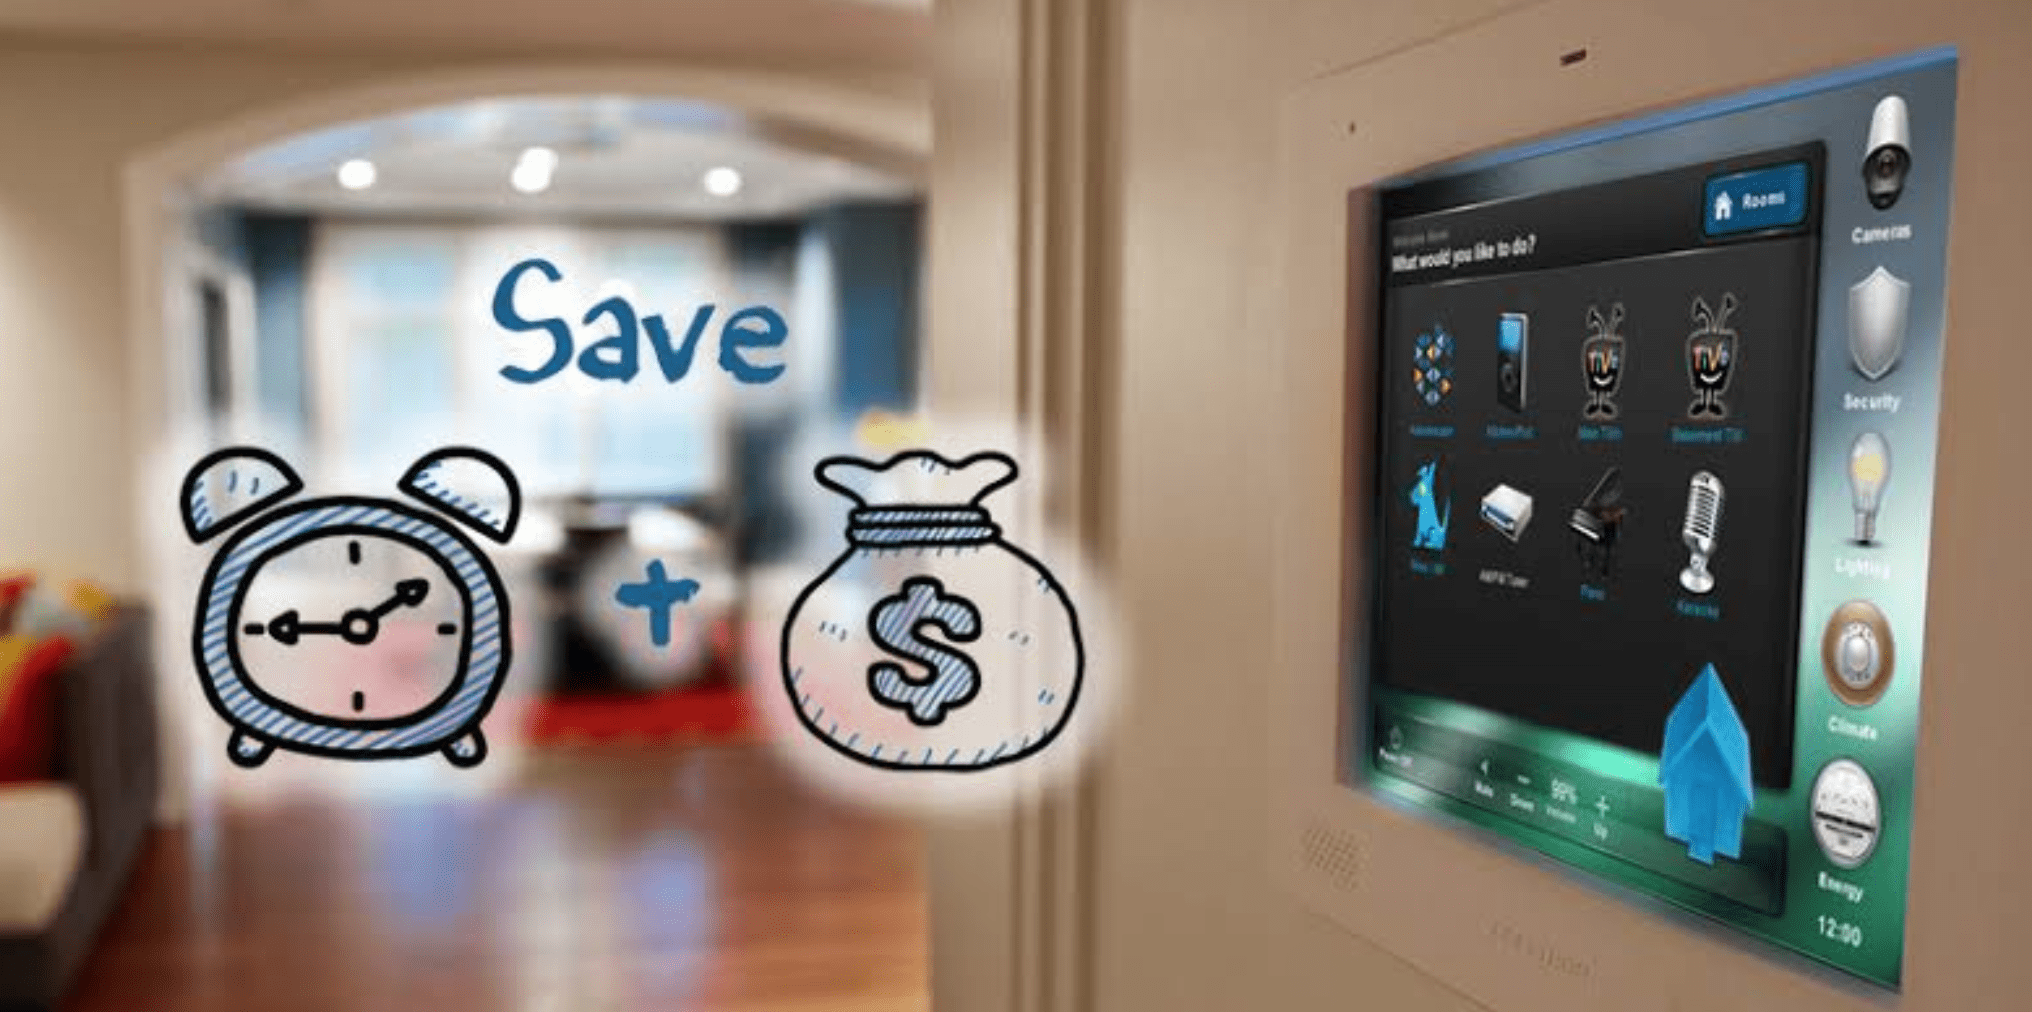 How to save money by using technology in your home